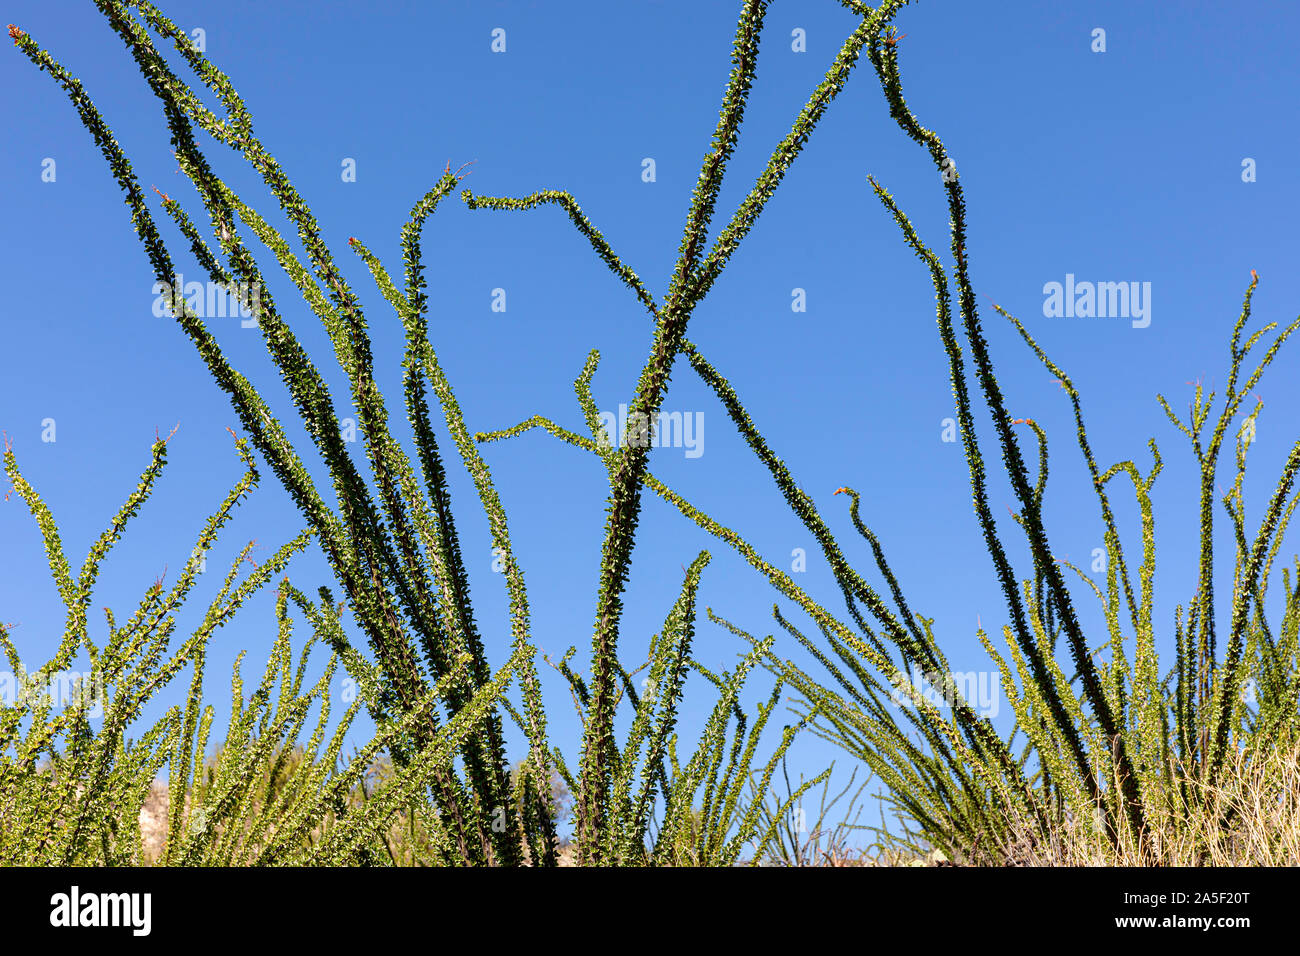 Ocotillo abstract, branches against blue sky, southern Arizona, USA Stock Photo